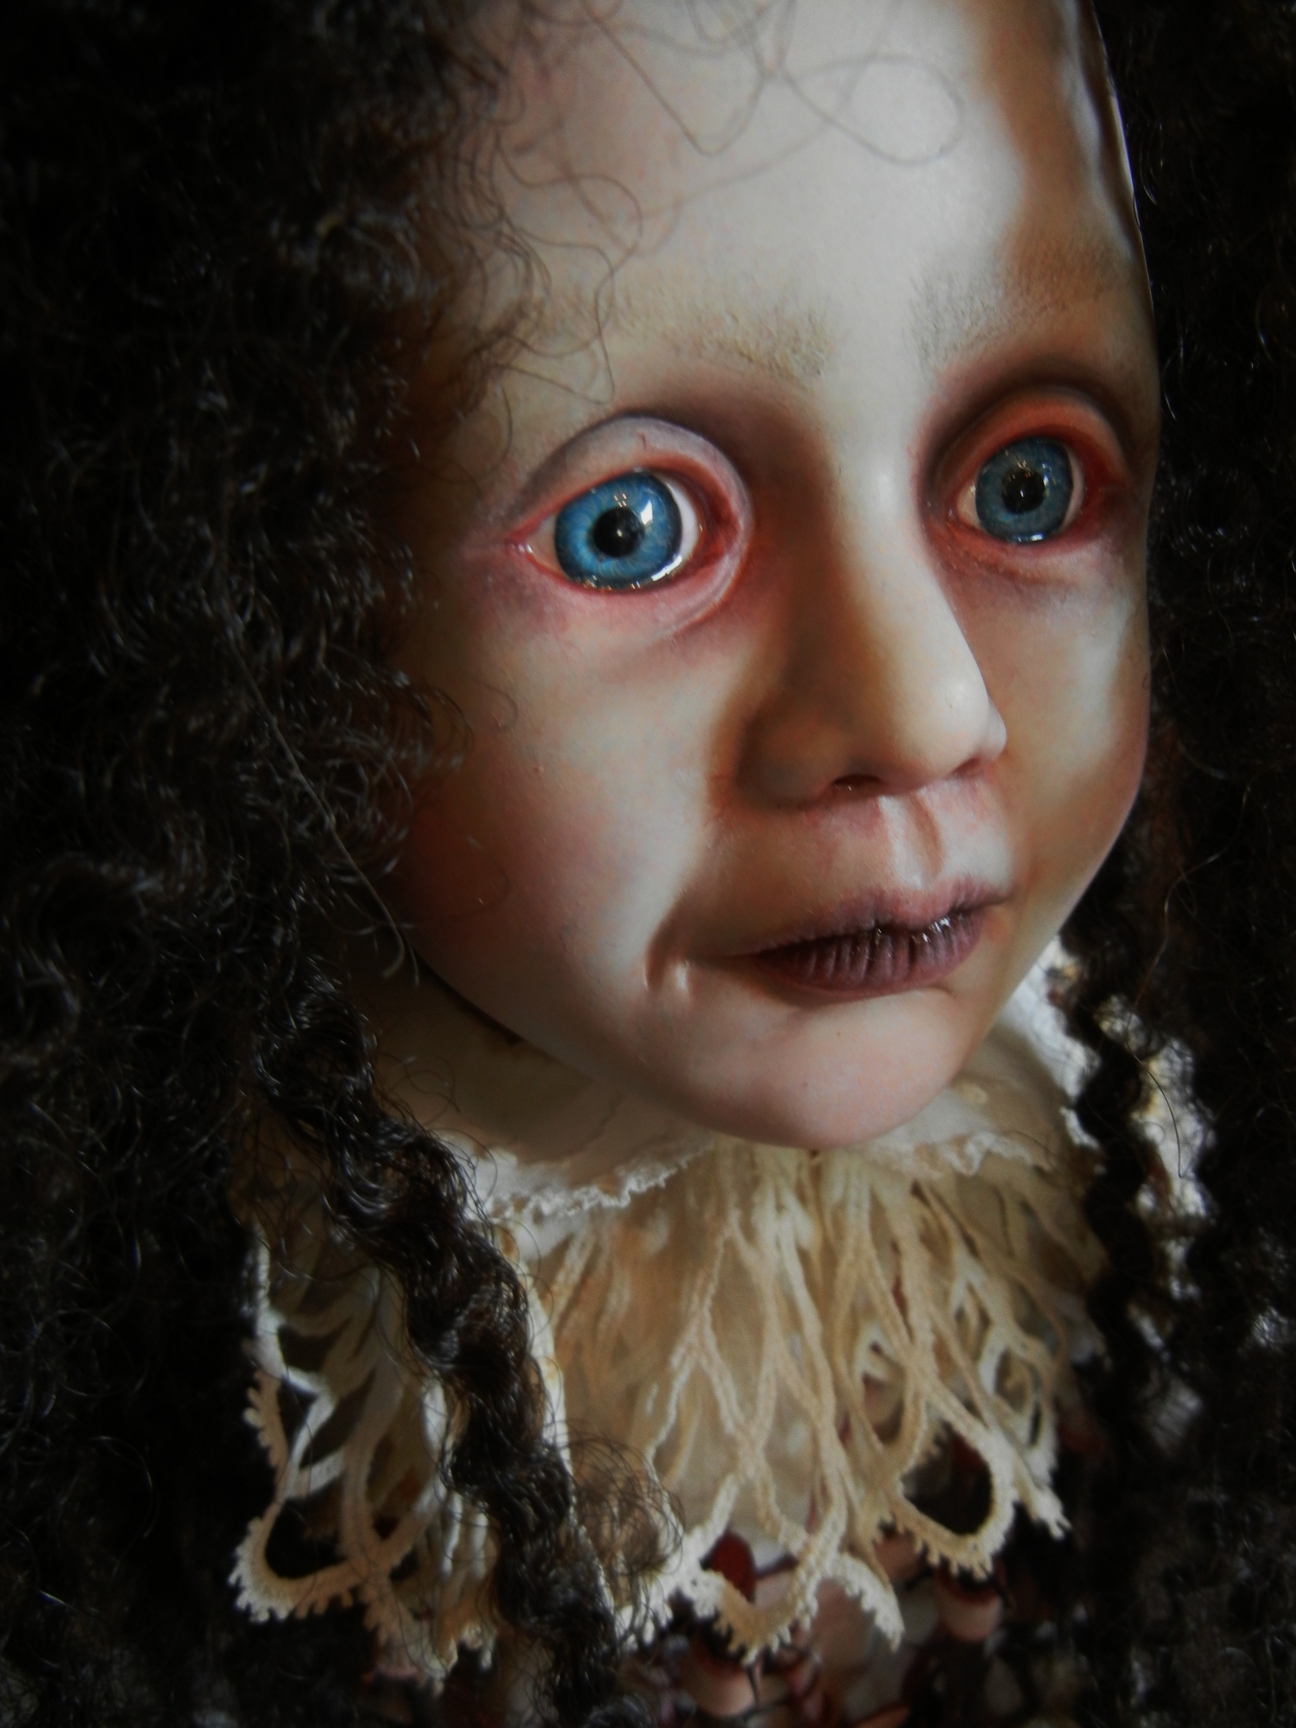 close-up gothic artdoll face repaint pale red-rimmed blue eyes, black ringlets, white lace collar